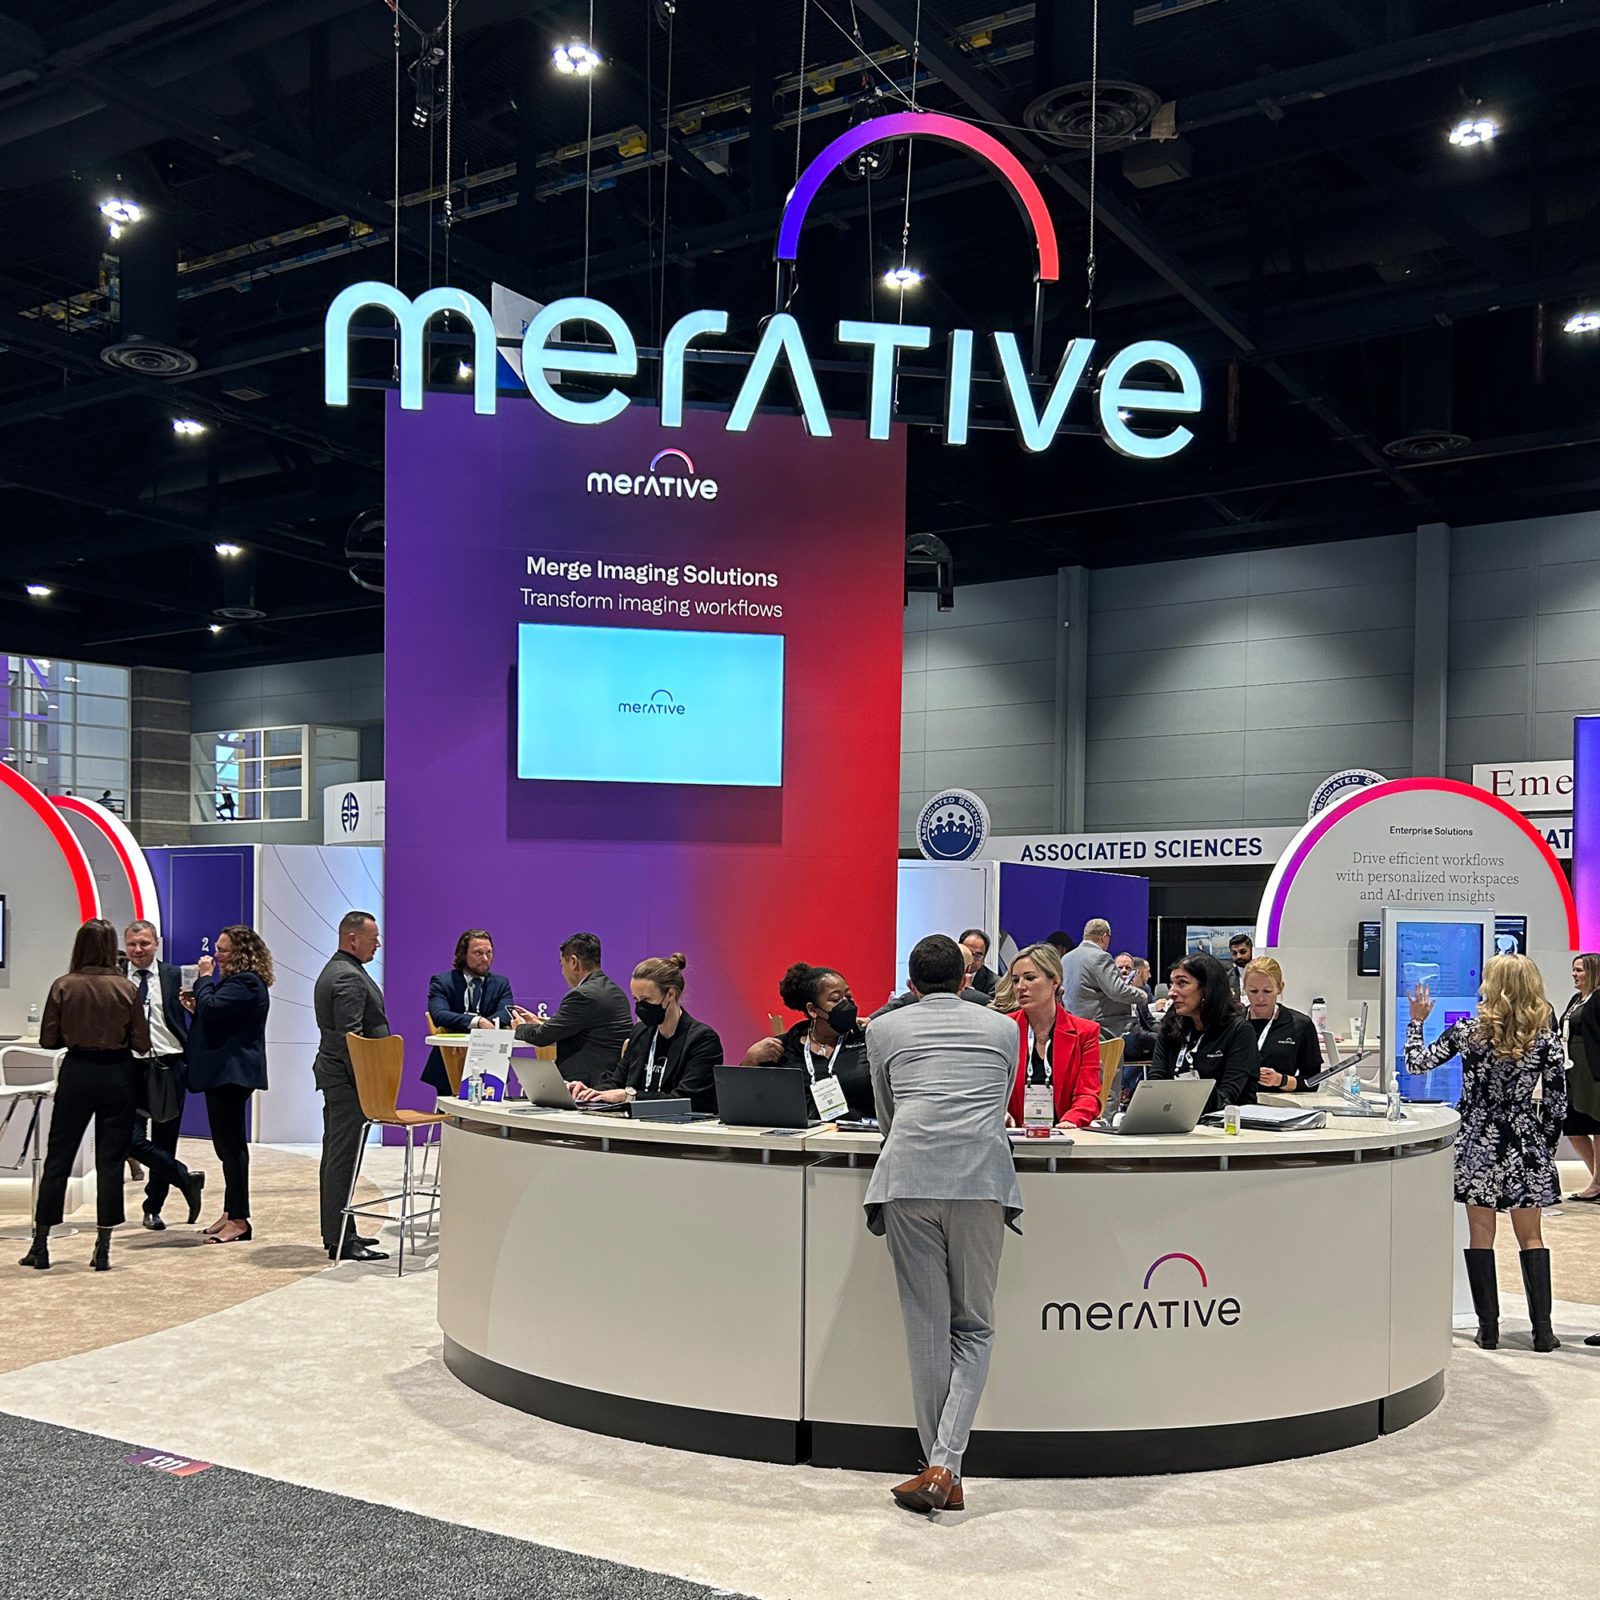 Merative's colorful booth